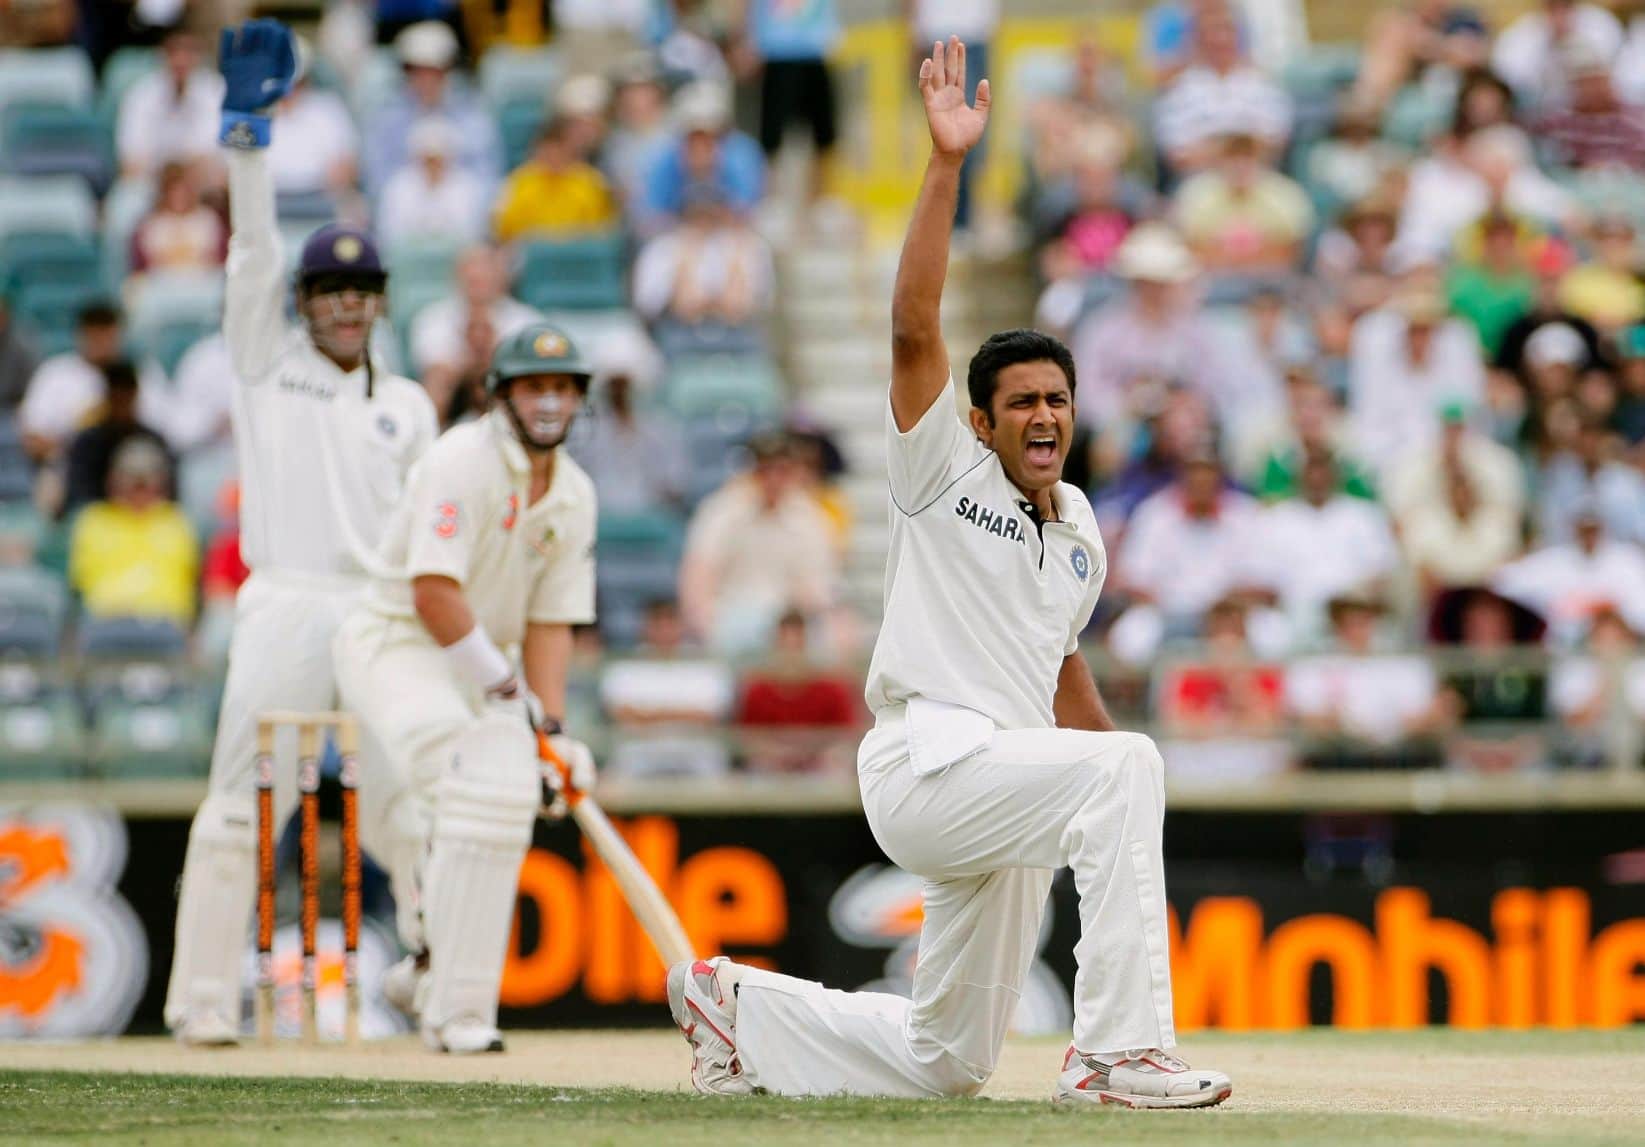 OTD in 2008: Anil Kumble achieved history; scalped 600th Test wicket